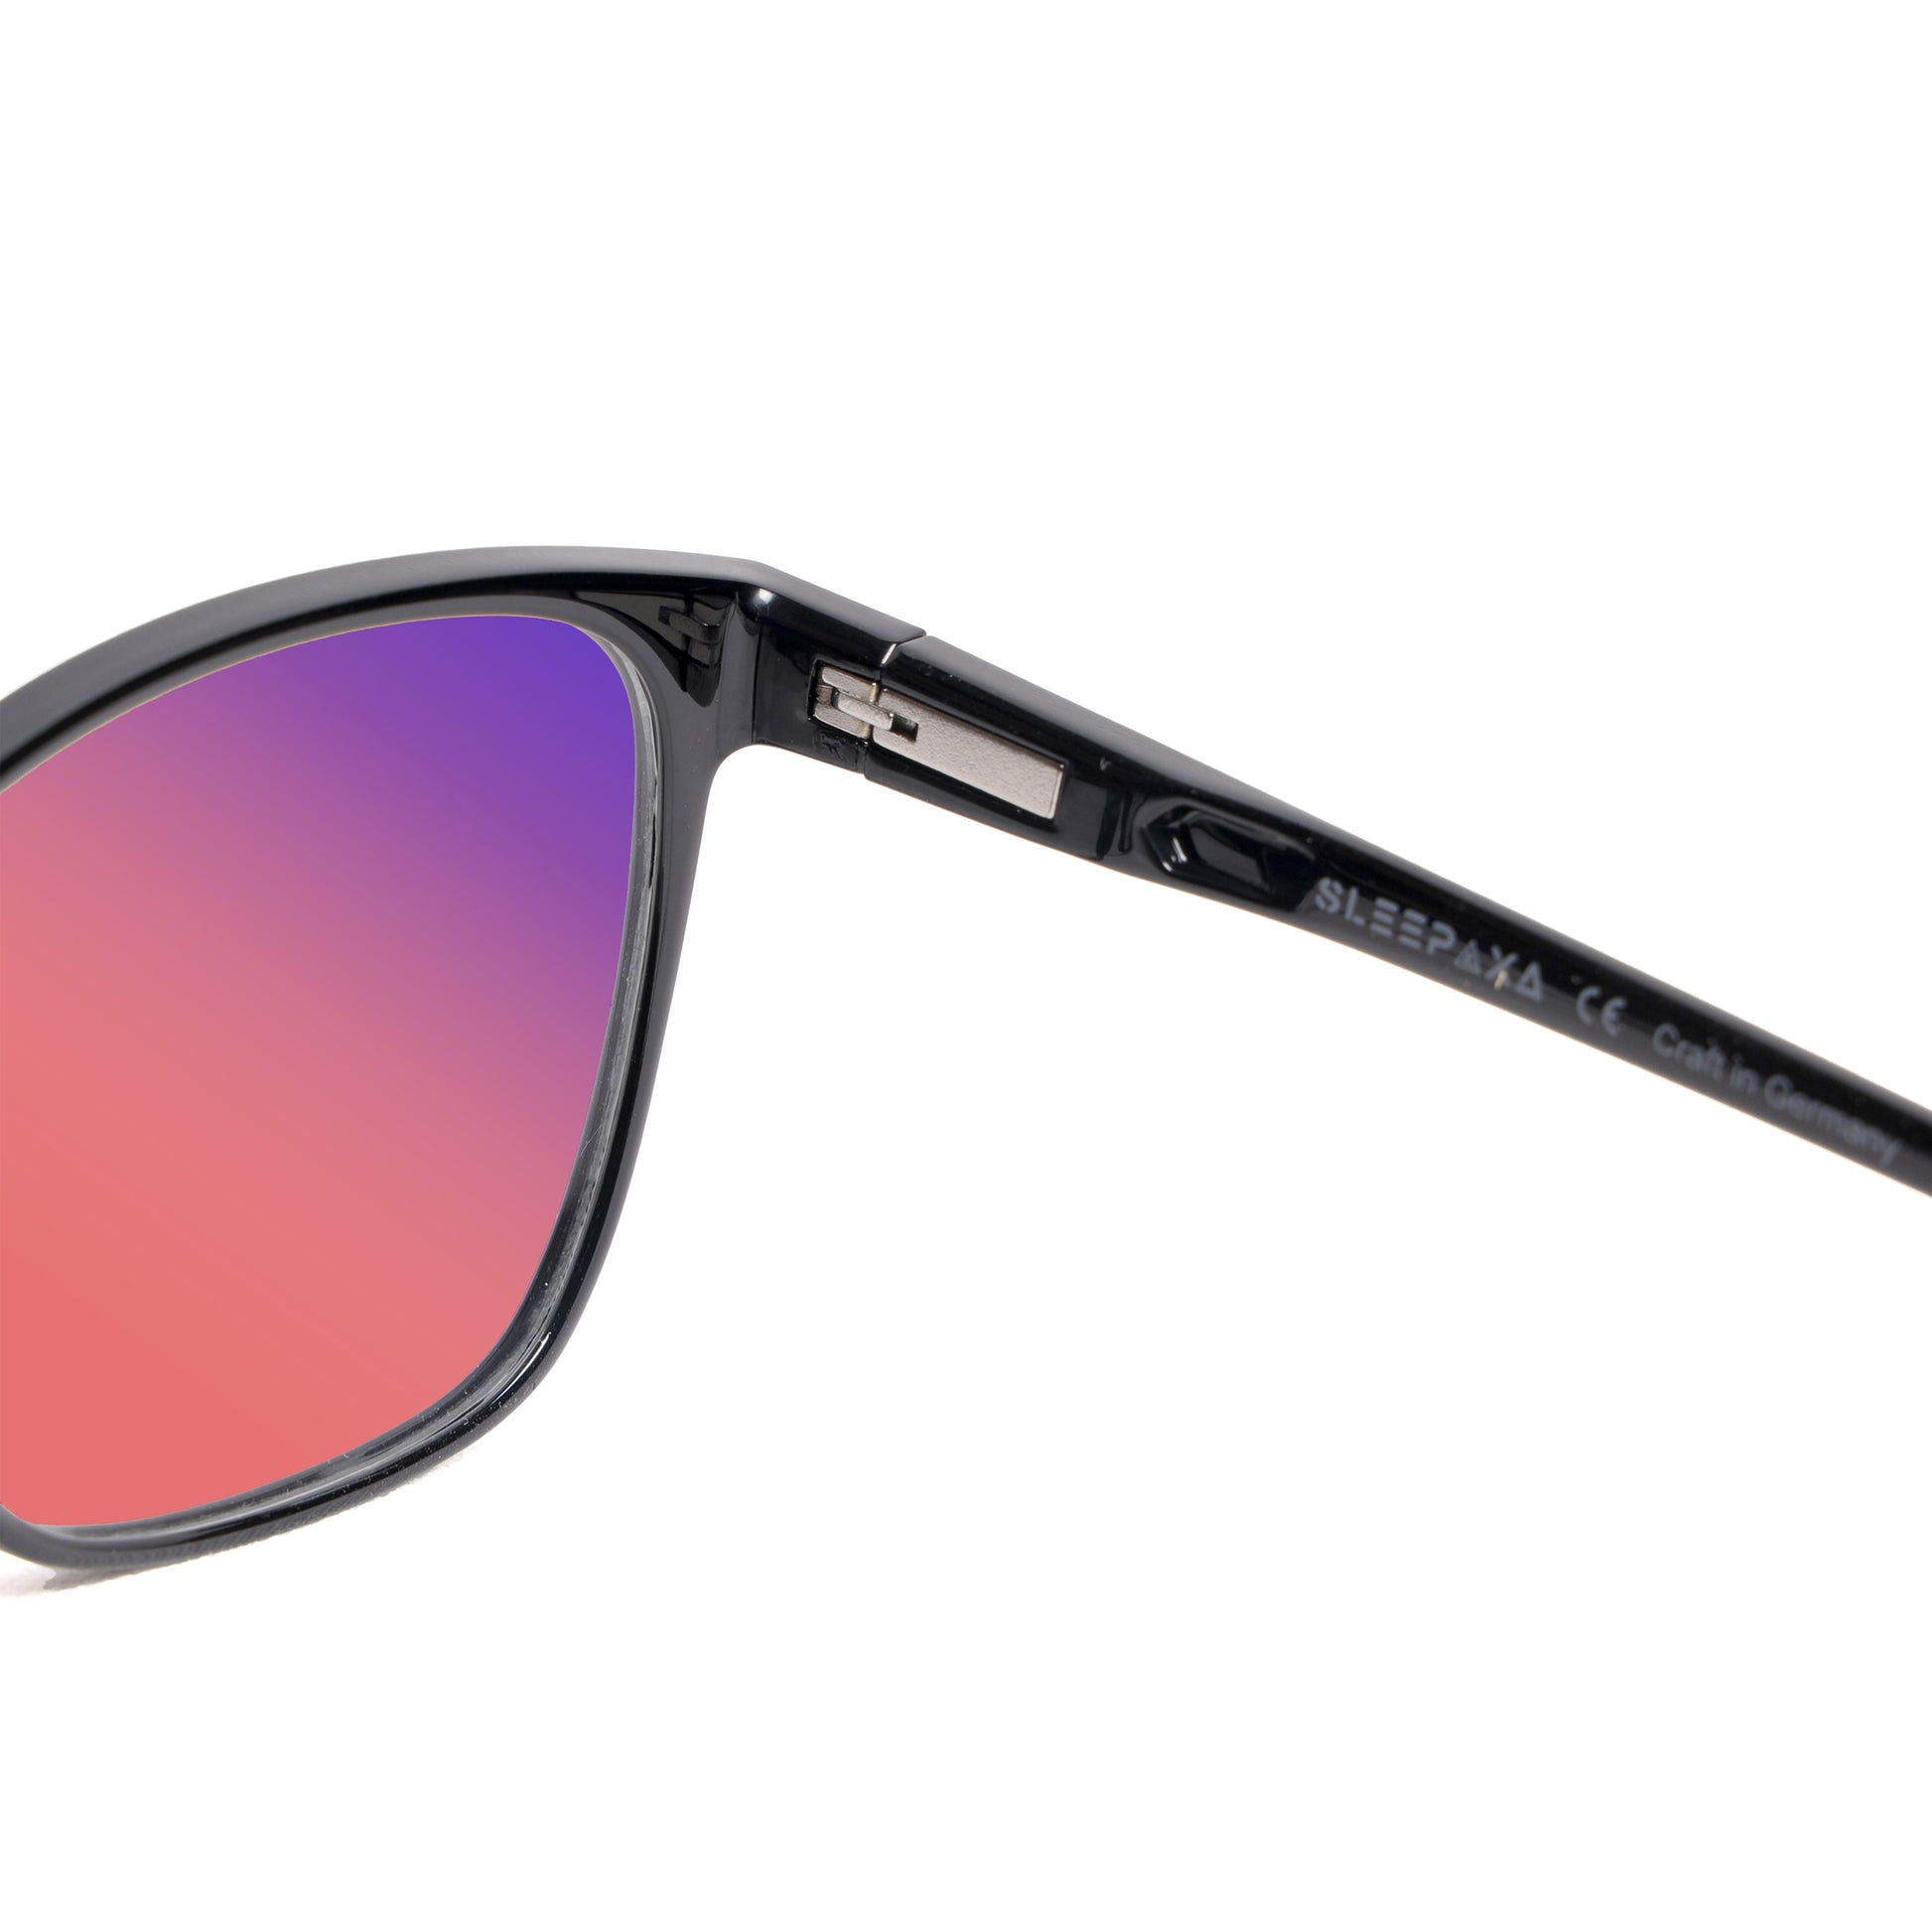 Inside Lense View of Sleepaxa Clarte FL41 Migraine & Light Sensitivity glasses with Cat Eye Shape Black frame, rose-tinted lenses, and high-quality tr90 temples for optimal comfort and durability